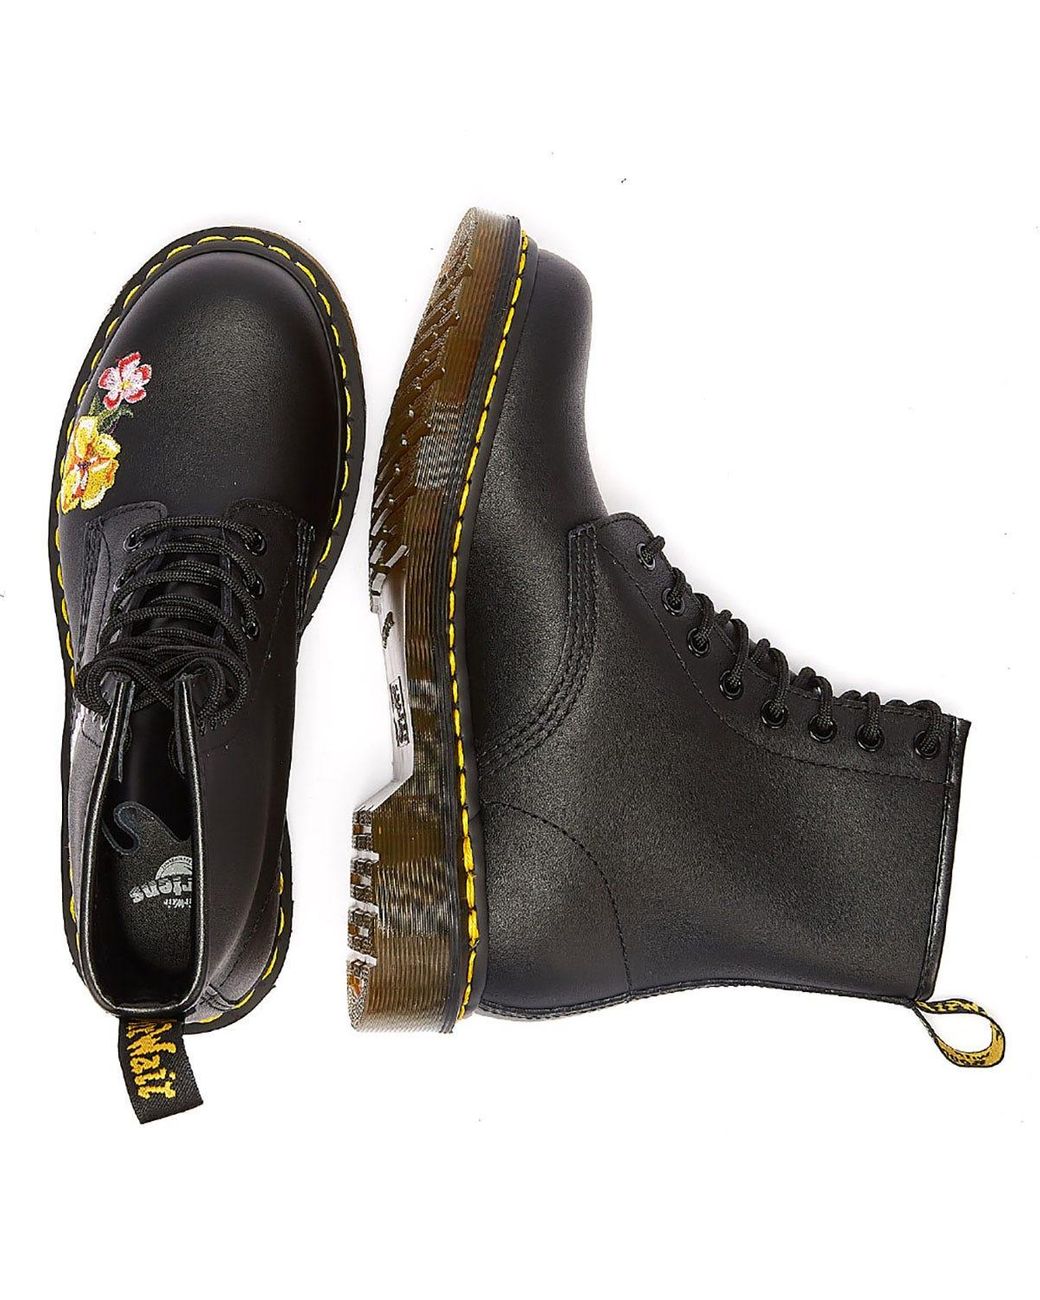 Dr. Martens Leather Dr. Martens 1460 Vonda Ii Softy Boots in Black - Lyst